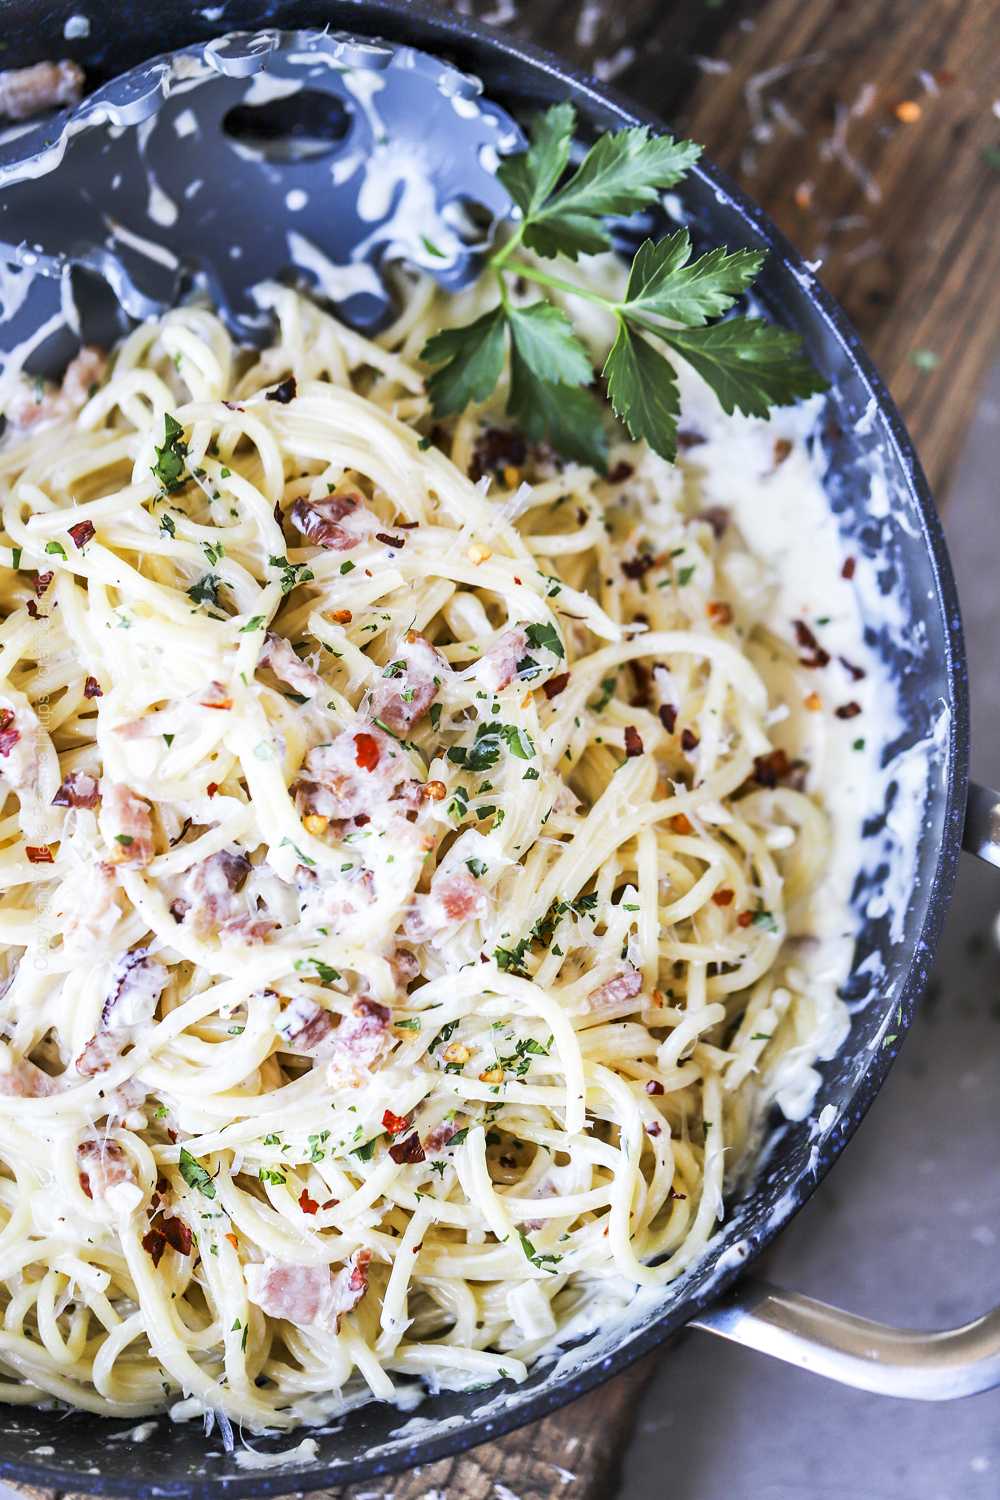 Pasta tossed in creamy bacon sauce garnished with parsley and red pepper flakes. 